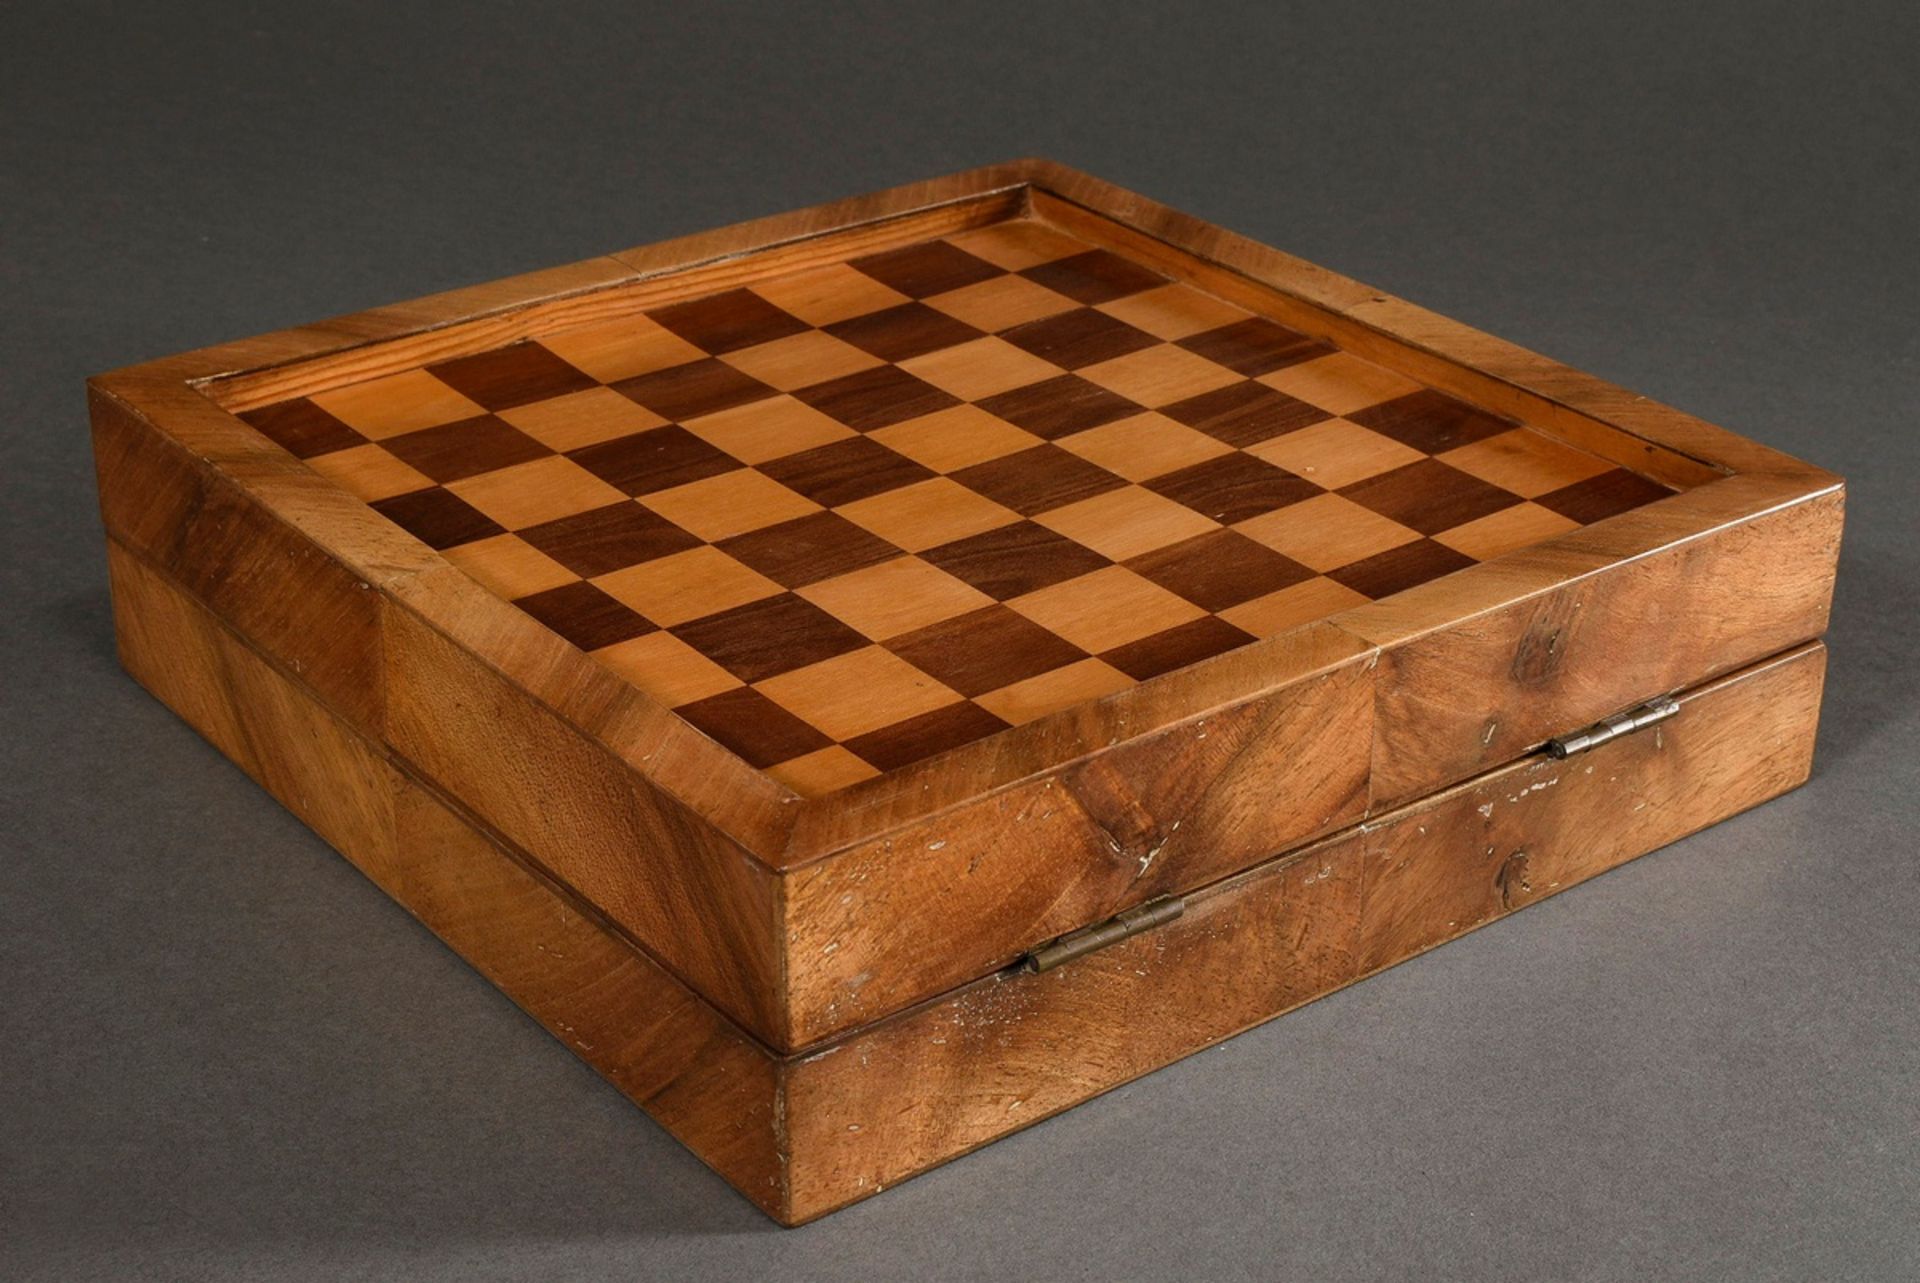 Small box with playing fields for mill, chess and backgammon, 19th c., fruitwood veneered on softwo - Image 2 of 3